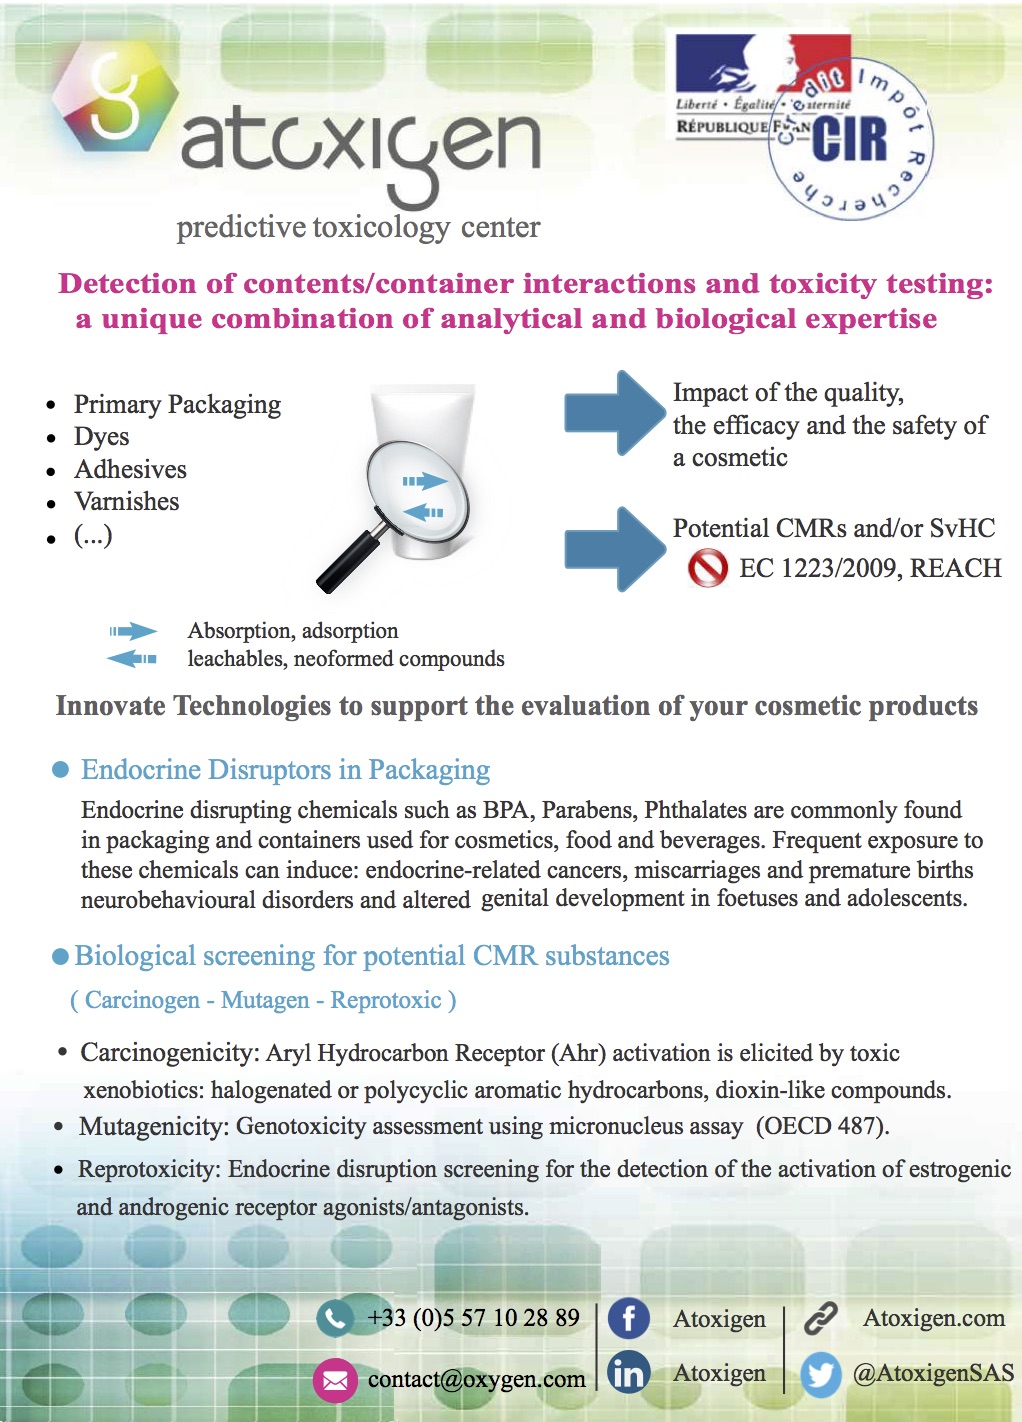 brochure about detection of contains and container interactionand toxicity testing : a unique combinaison of analytical and biological expertise